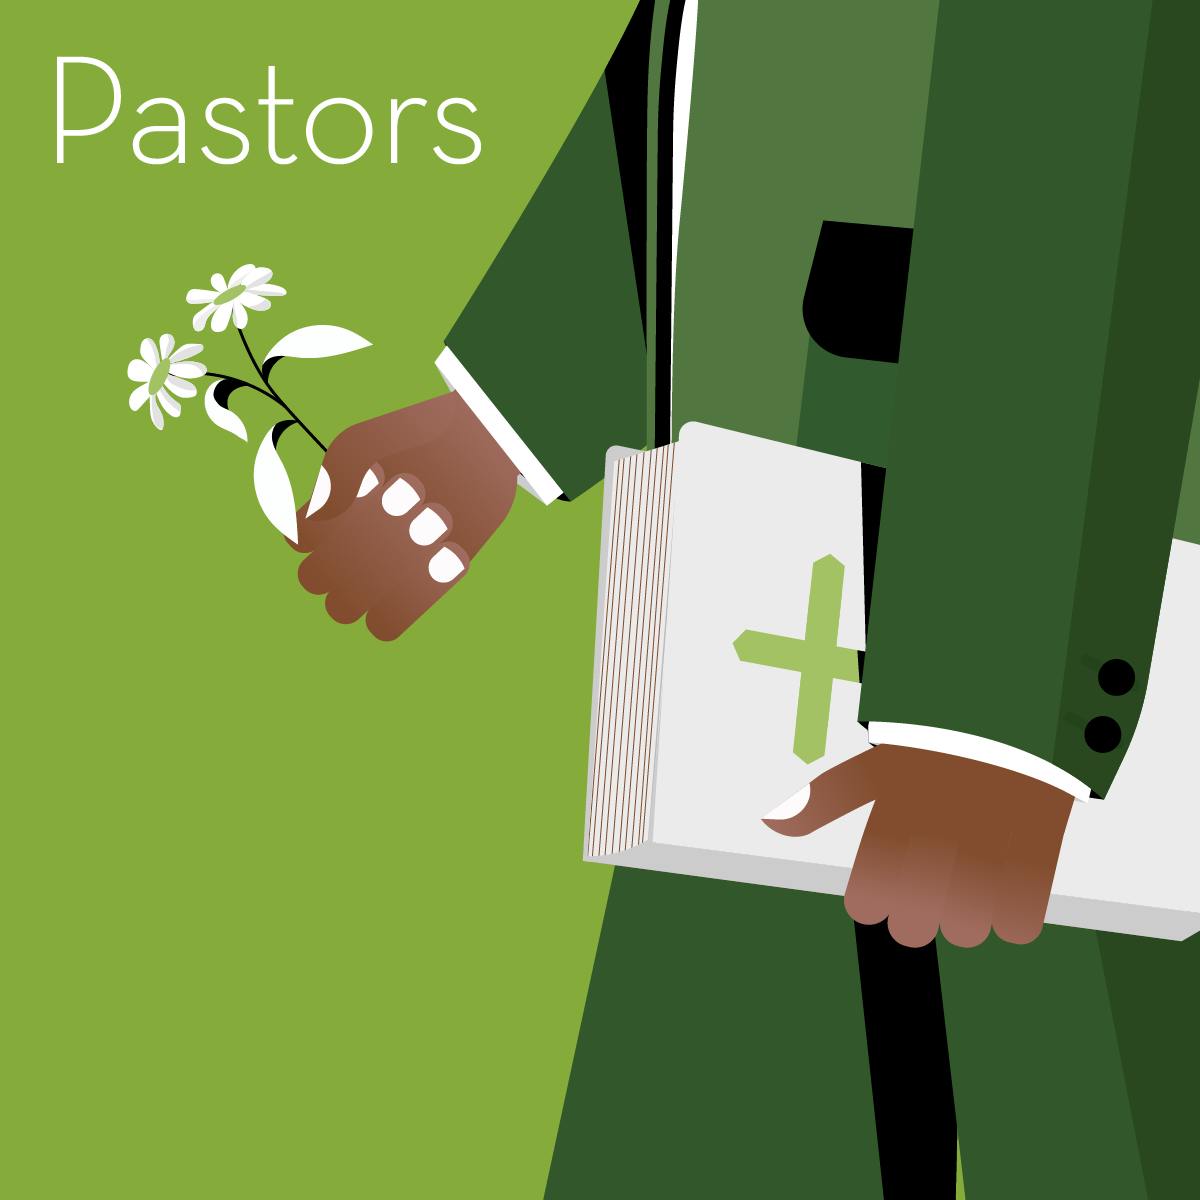 Illustration of a gift guide for pastors, showing a priest holding a bible and a flower.